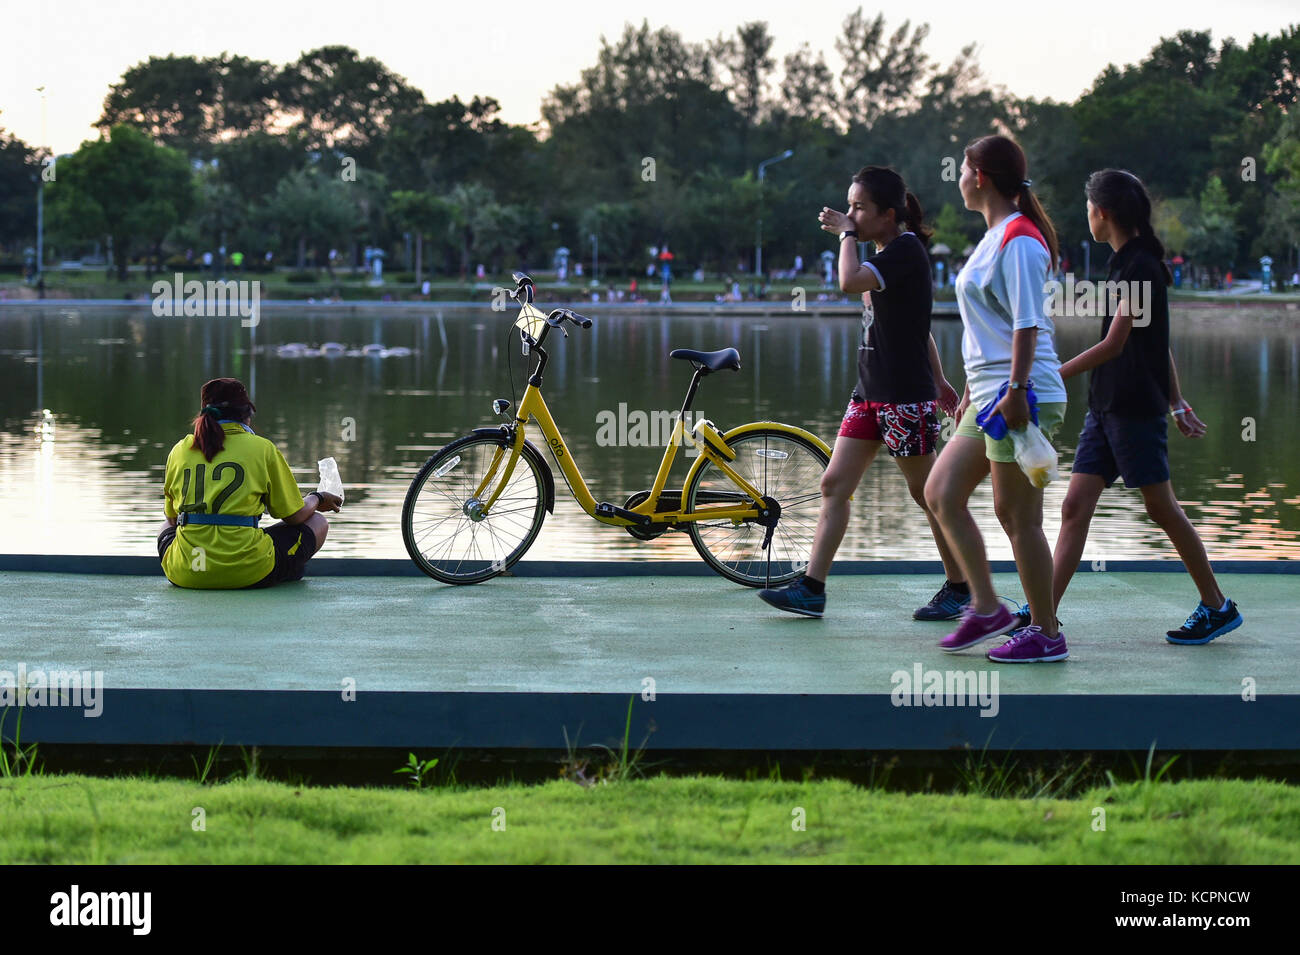 Phuket, Thailand. 5th Oct, 2017. People walk past an ofo sharing-bike at a public park in Phuket, Thailand, Oct. 5, 2017. China's dock-less bike-sharing company ofo provided more than 1,000 bikes in Phuket's key locations in late September and offered a 1-month free trial without deposit fee. Now the bike-sharing service has benefited local residents and tourists. Ofo's regular service fee will be charged at 5 Baht per 30 minutes usage, with a deposit fee of 99 Baht. Credit: Li Mangmang/Xinhua/Alamy Live News Stock Photo